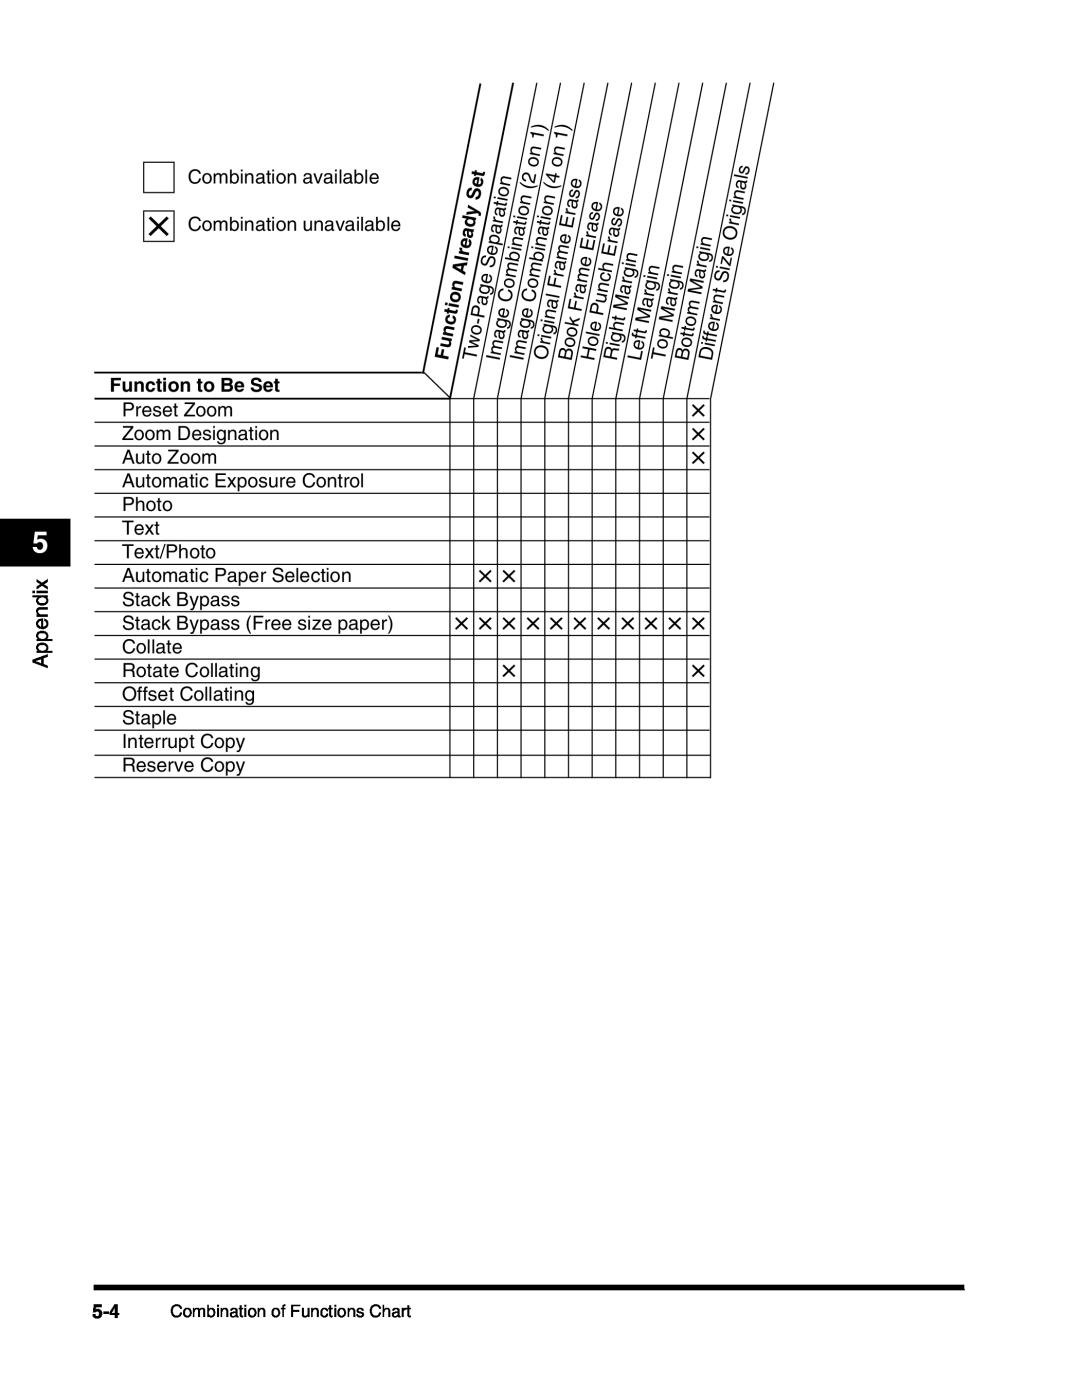 Canon 2010F manual Appendix, Function to Be Set, Combination of Functions Chart 